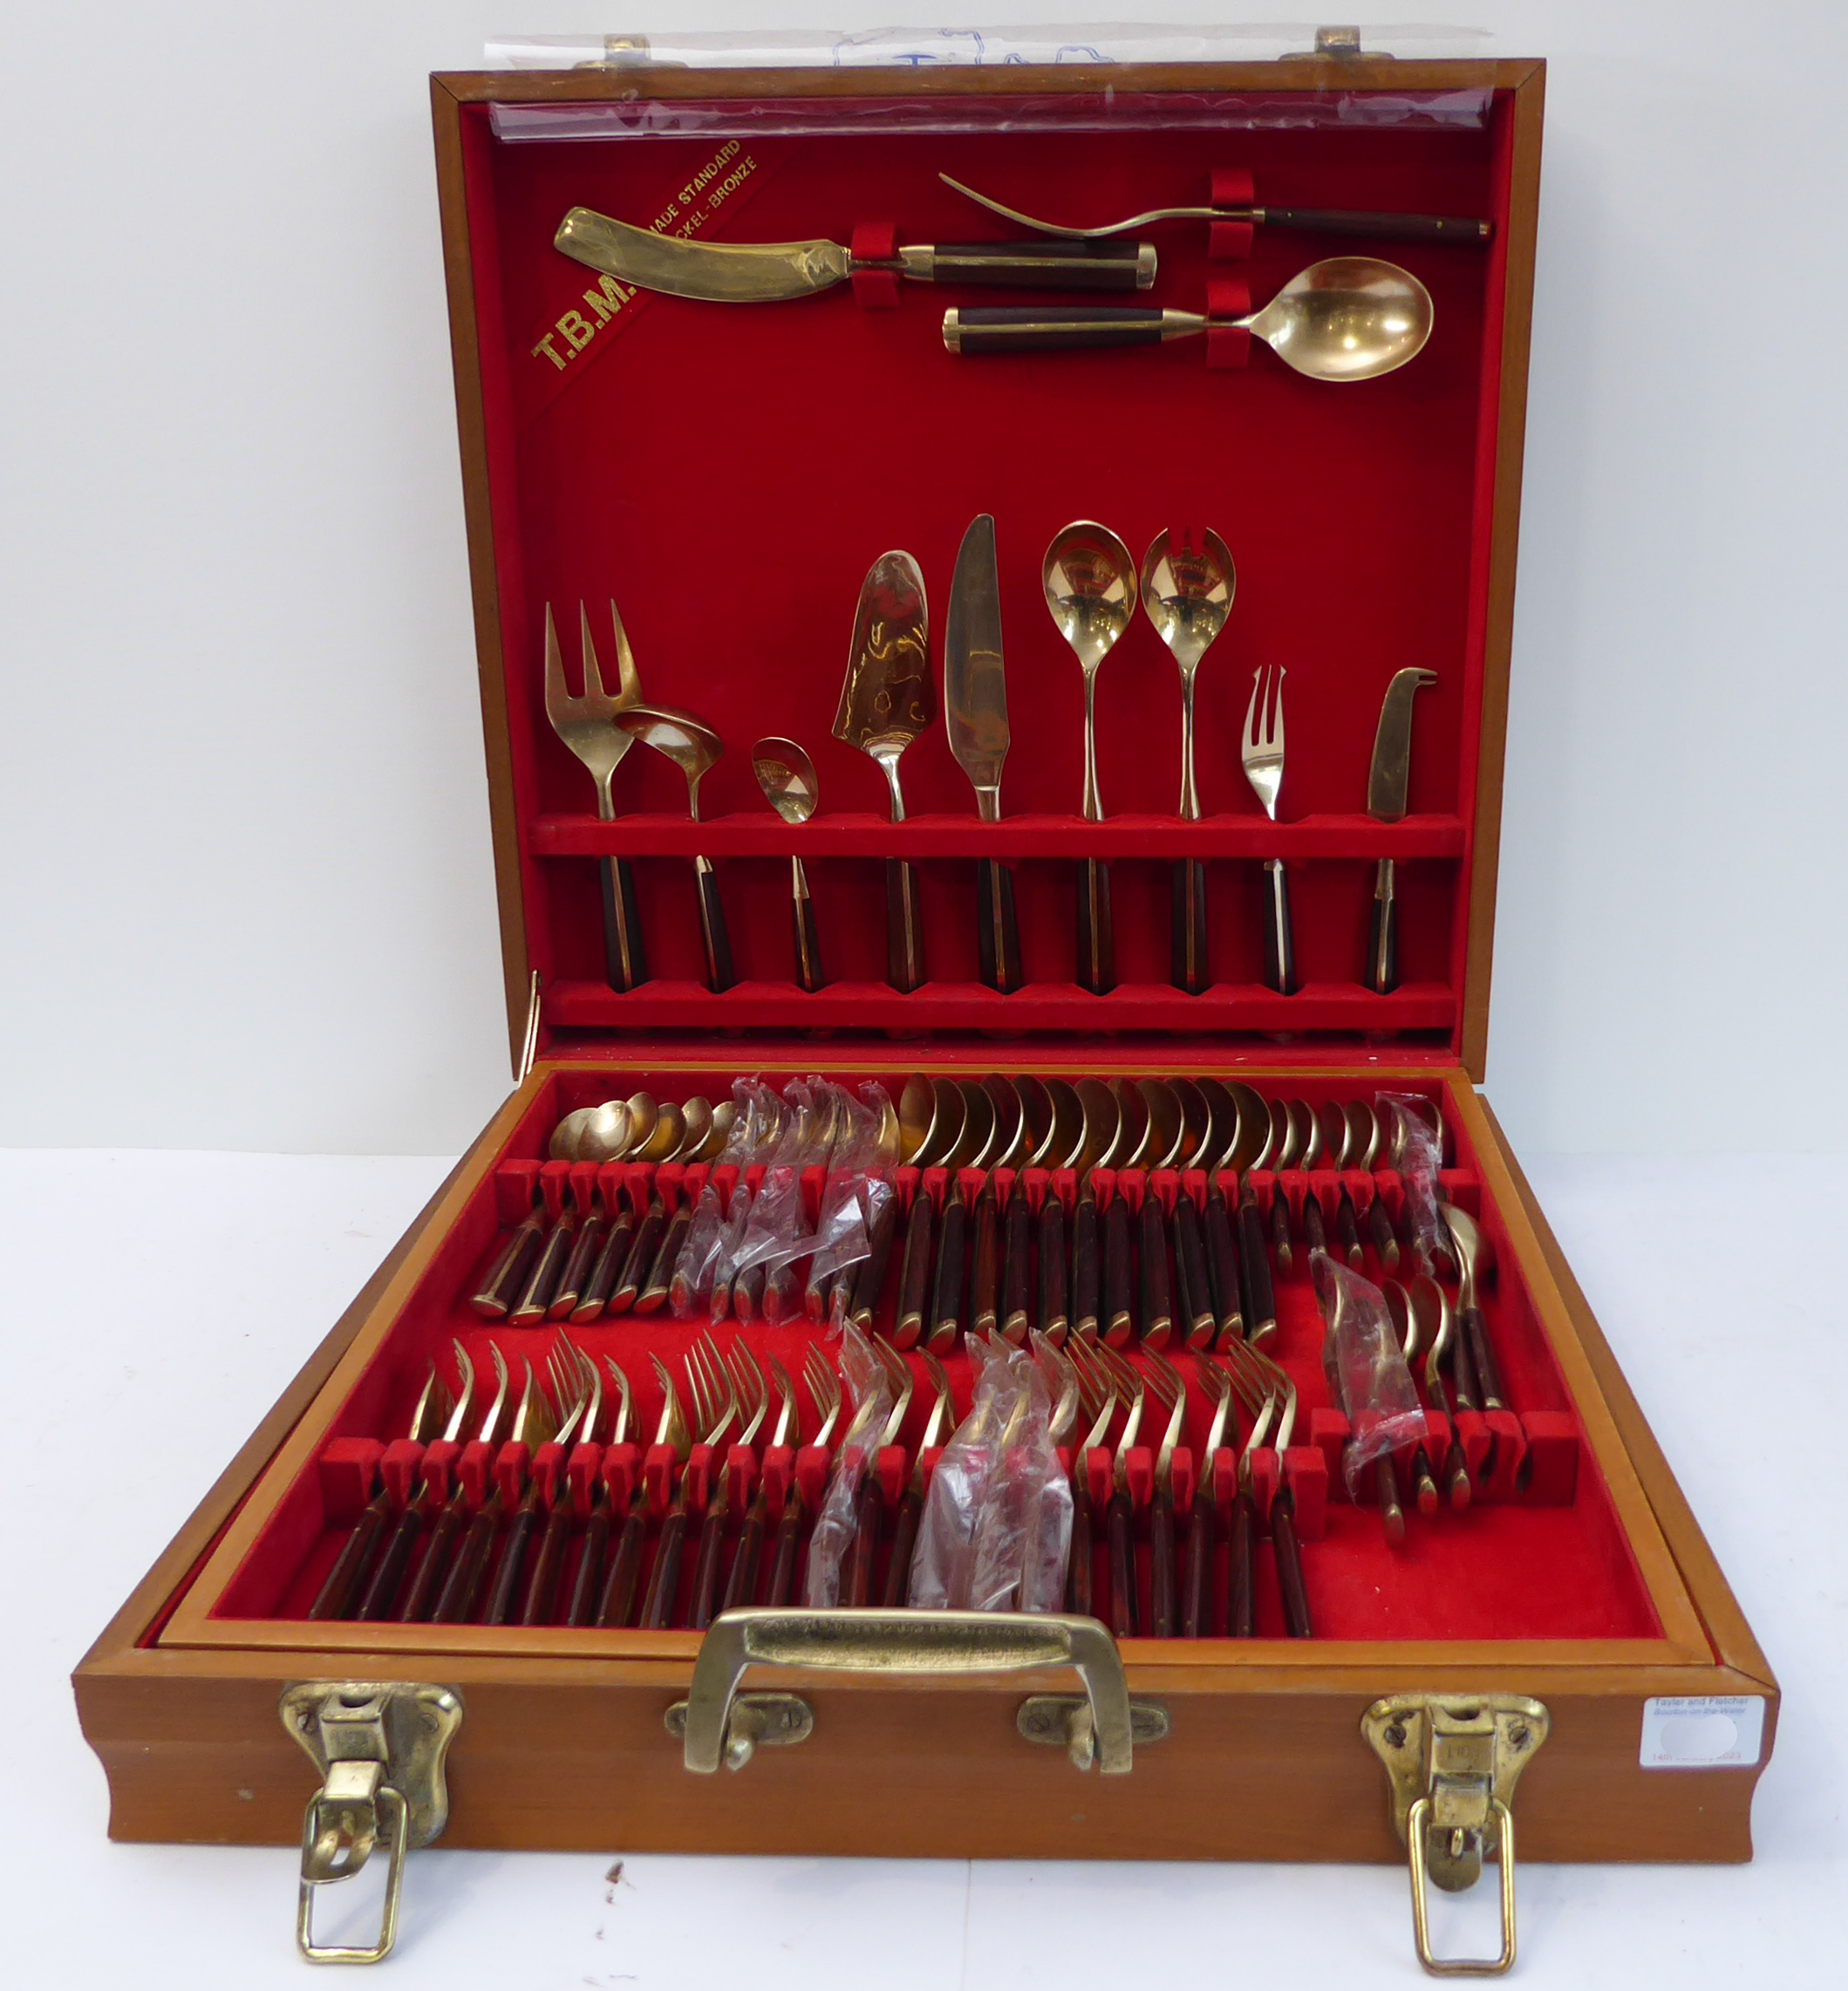 A Thai nickel-bronze ('high tarnish resistant') 12-place cutlery canteen comprising: varying sized